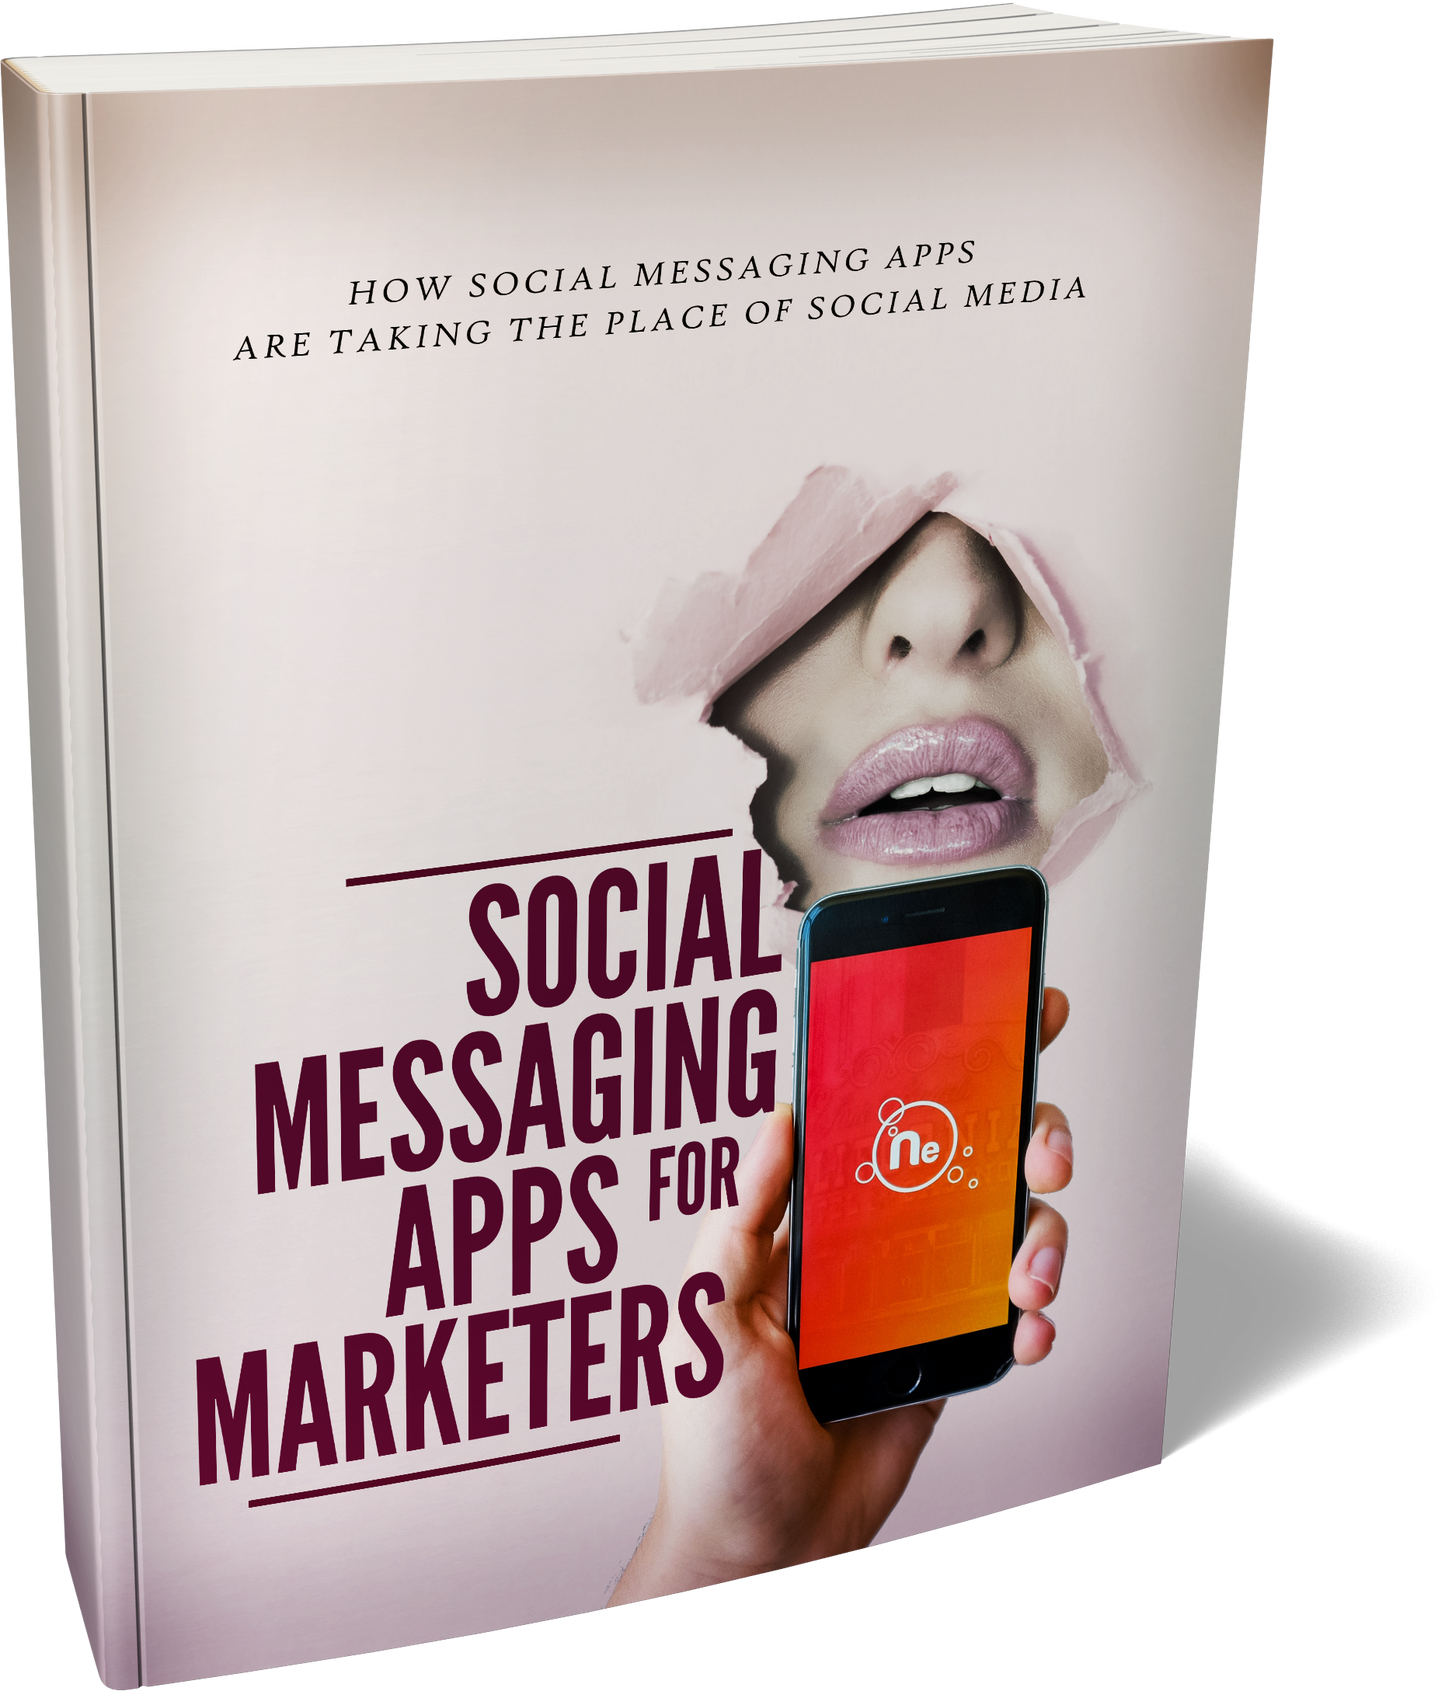 Social Messaging Apps for Marketers